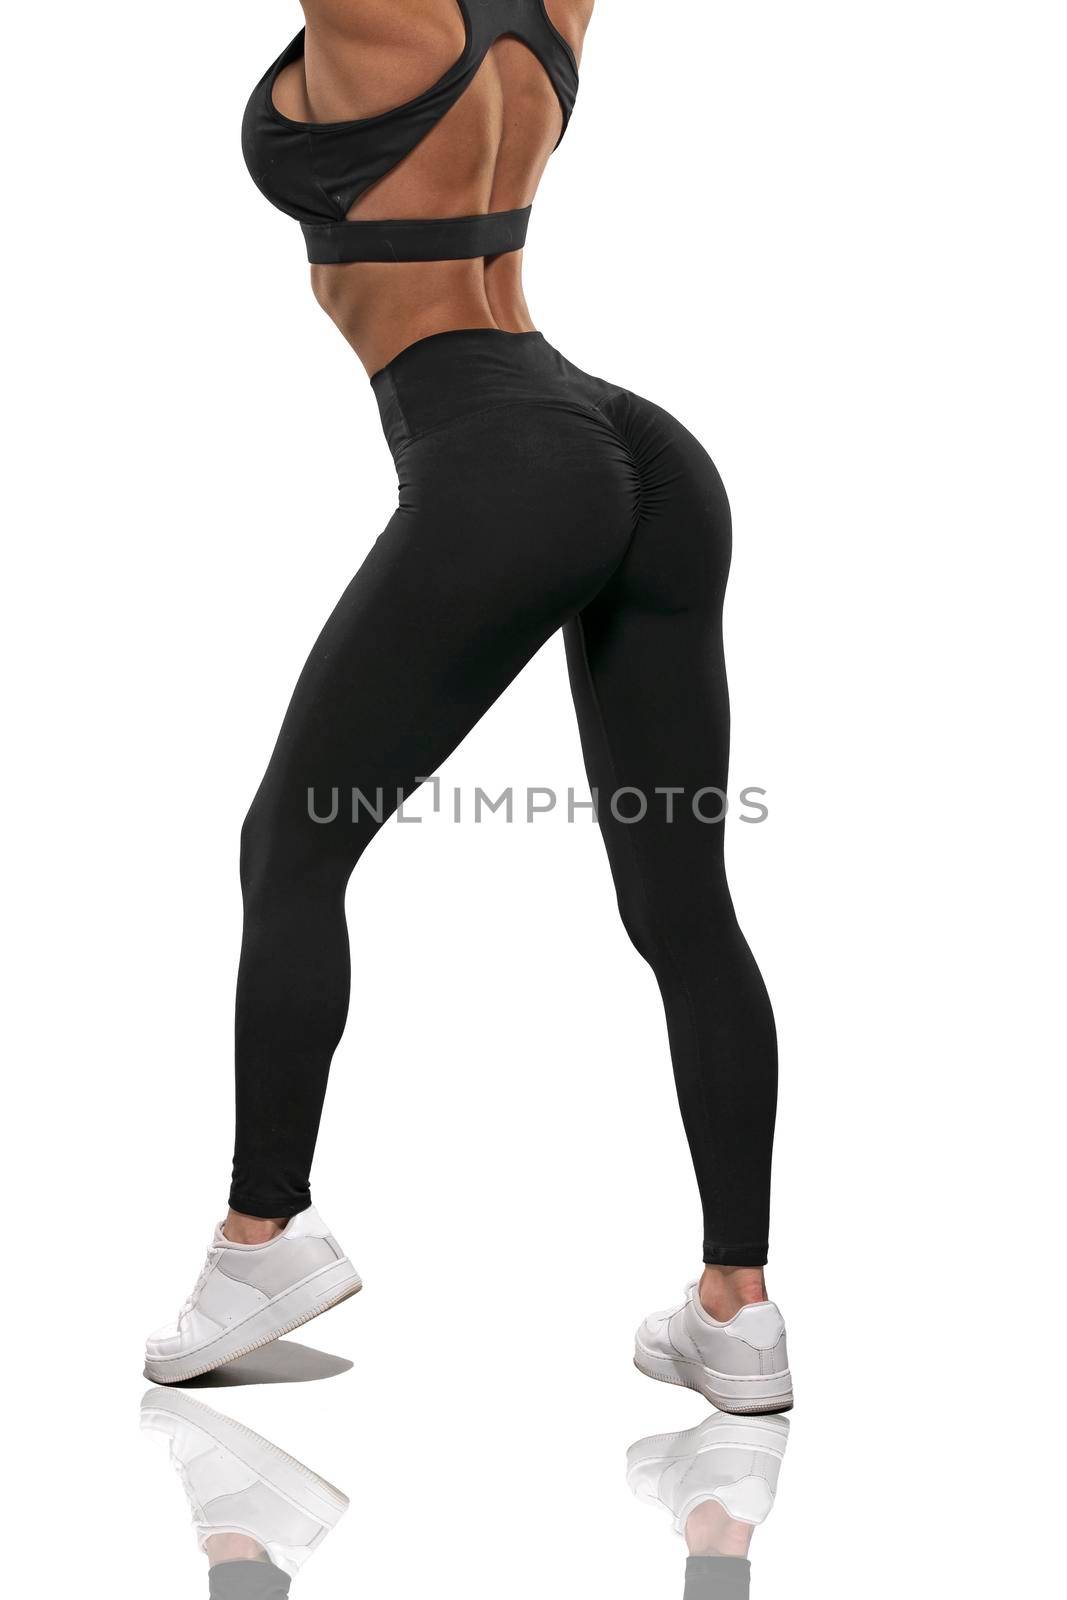 legs brunette girl in black leggings and a top stay back on a white background